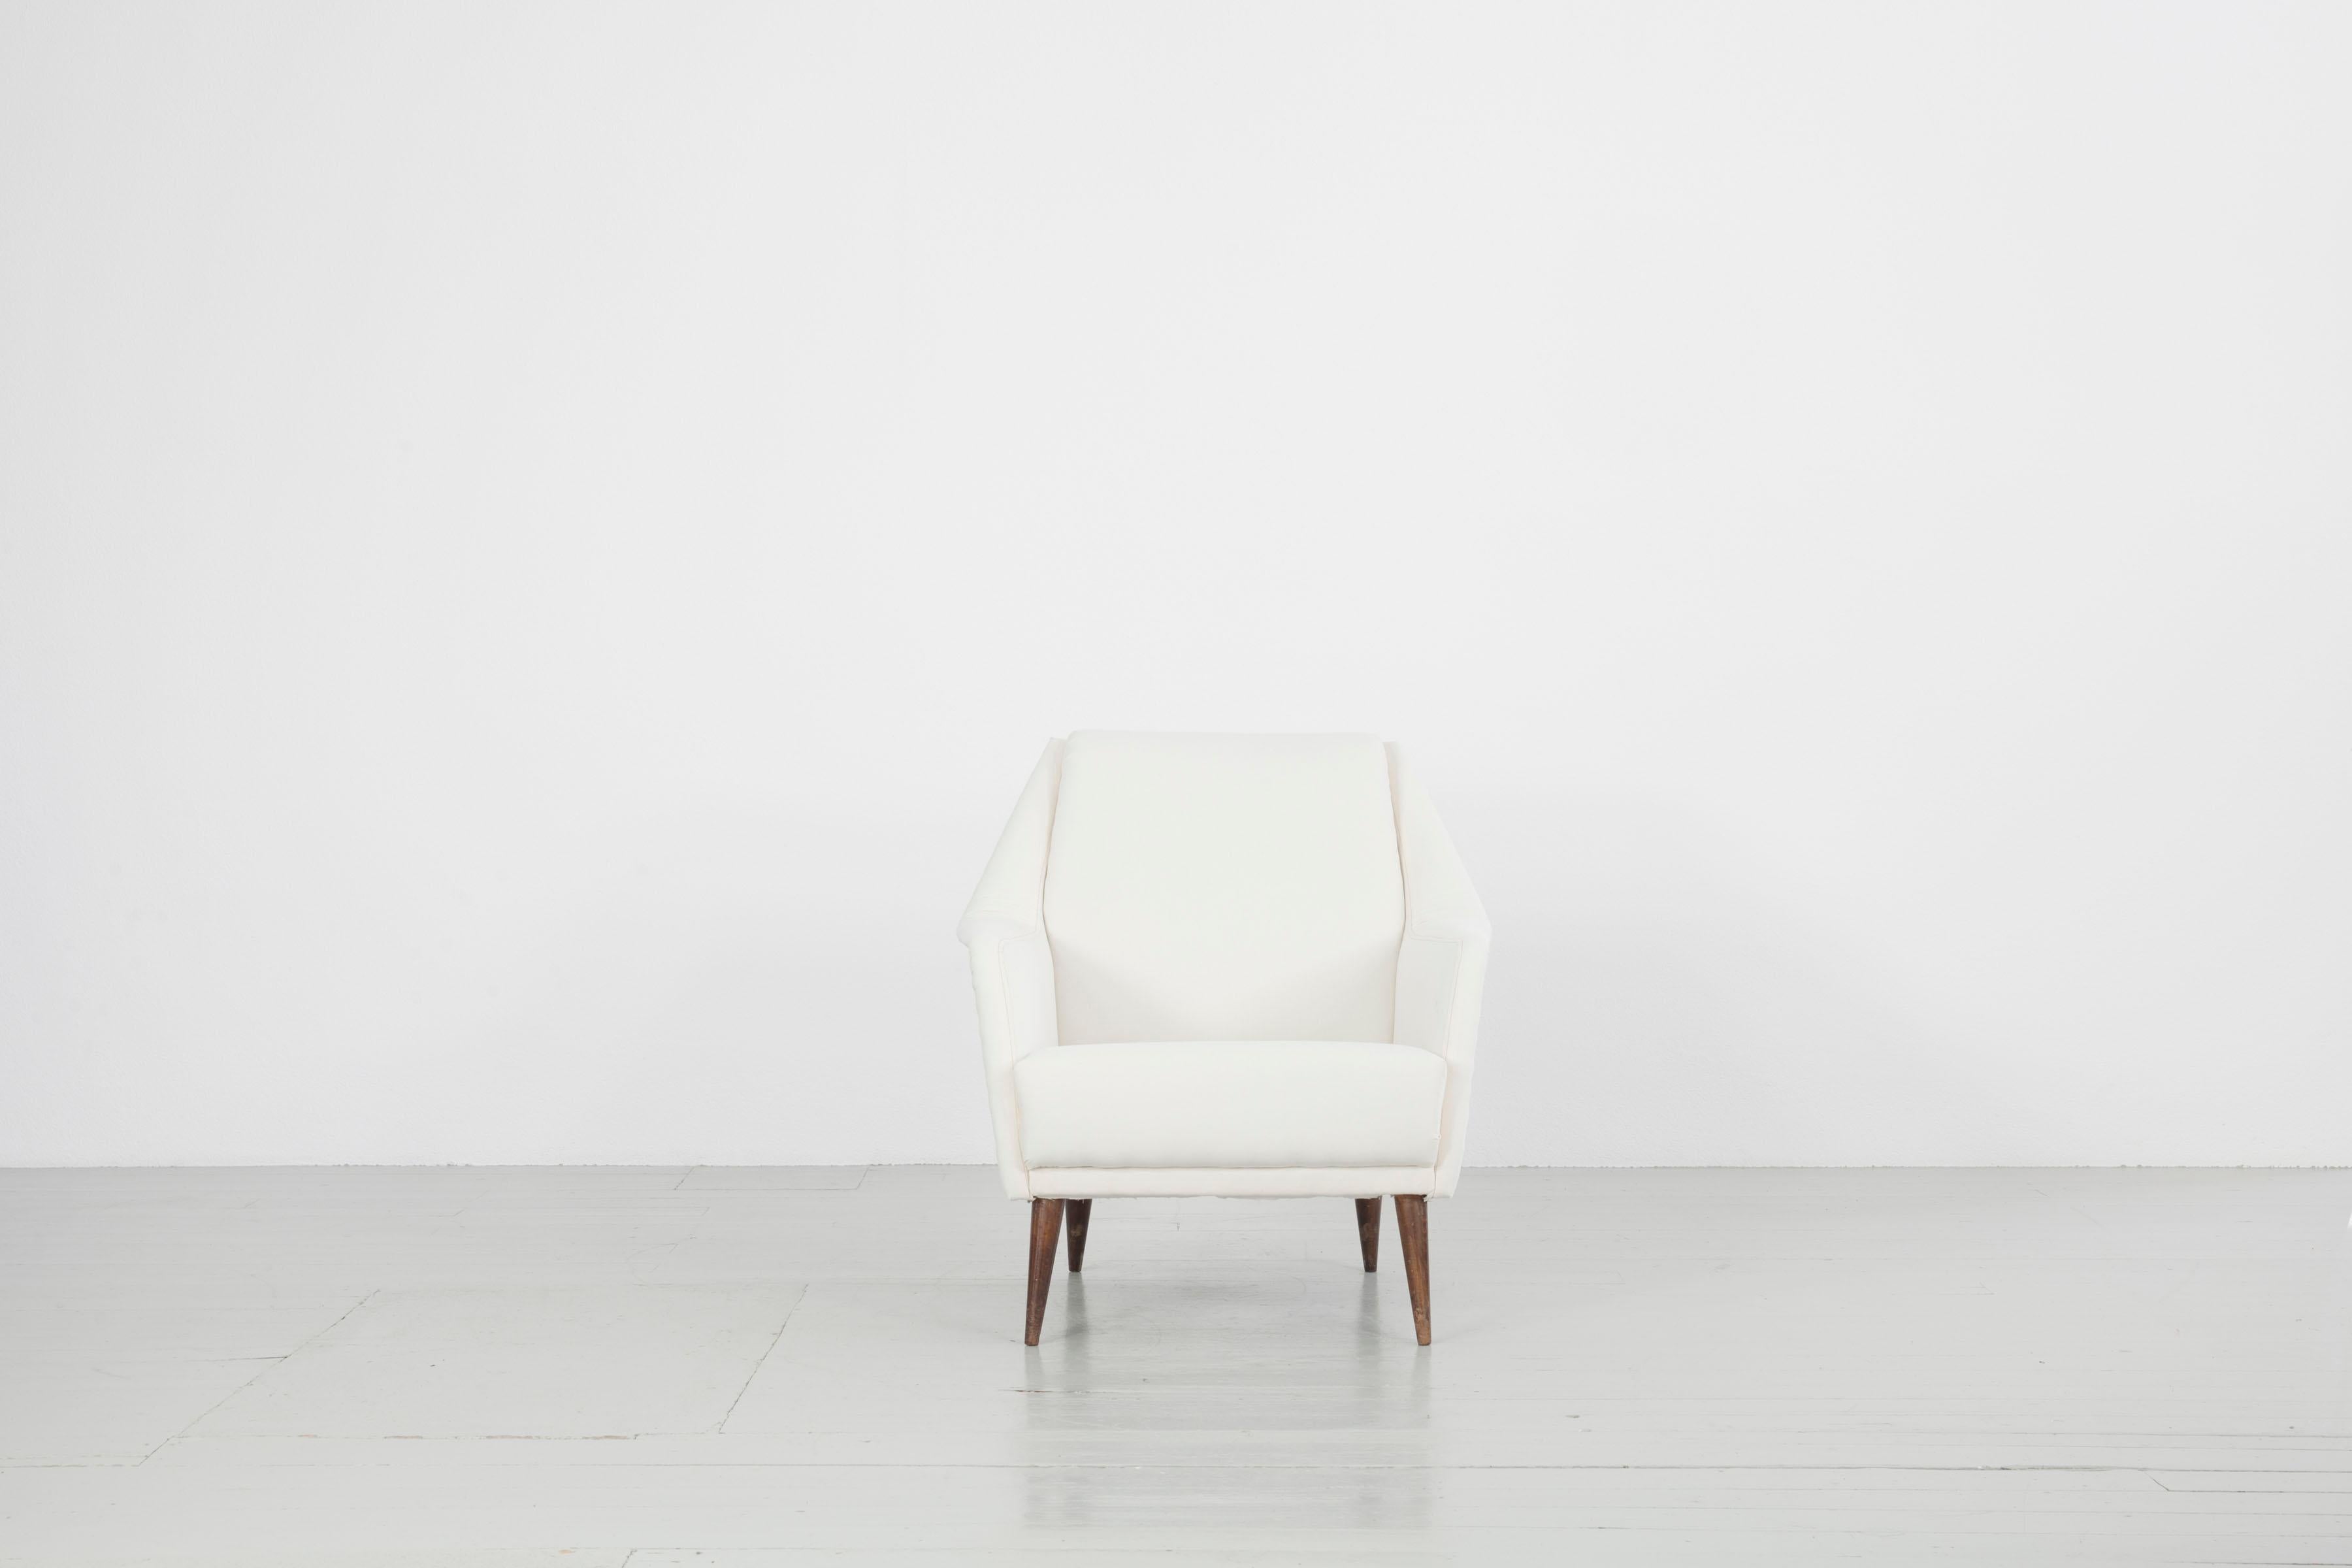 Model 802 armchair - Design by Carlo de Carli, manufactured by Cassina, Italy, 1954. The wooden frame with foam upholstery rests on elastic ribbons. The armchair was reupholstered and covered with a white muslin by our expert and needs now only a